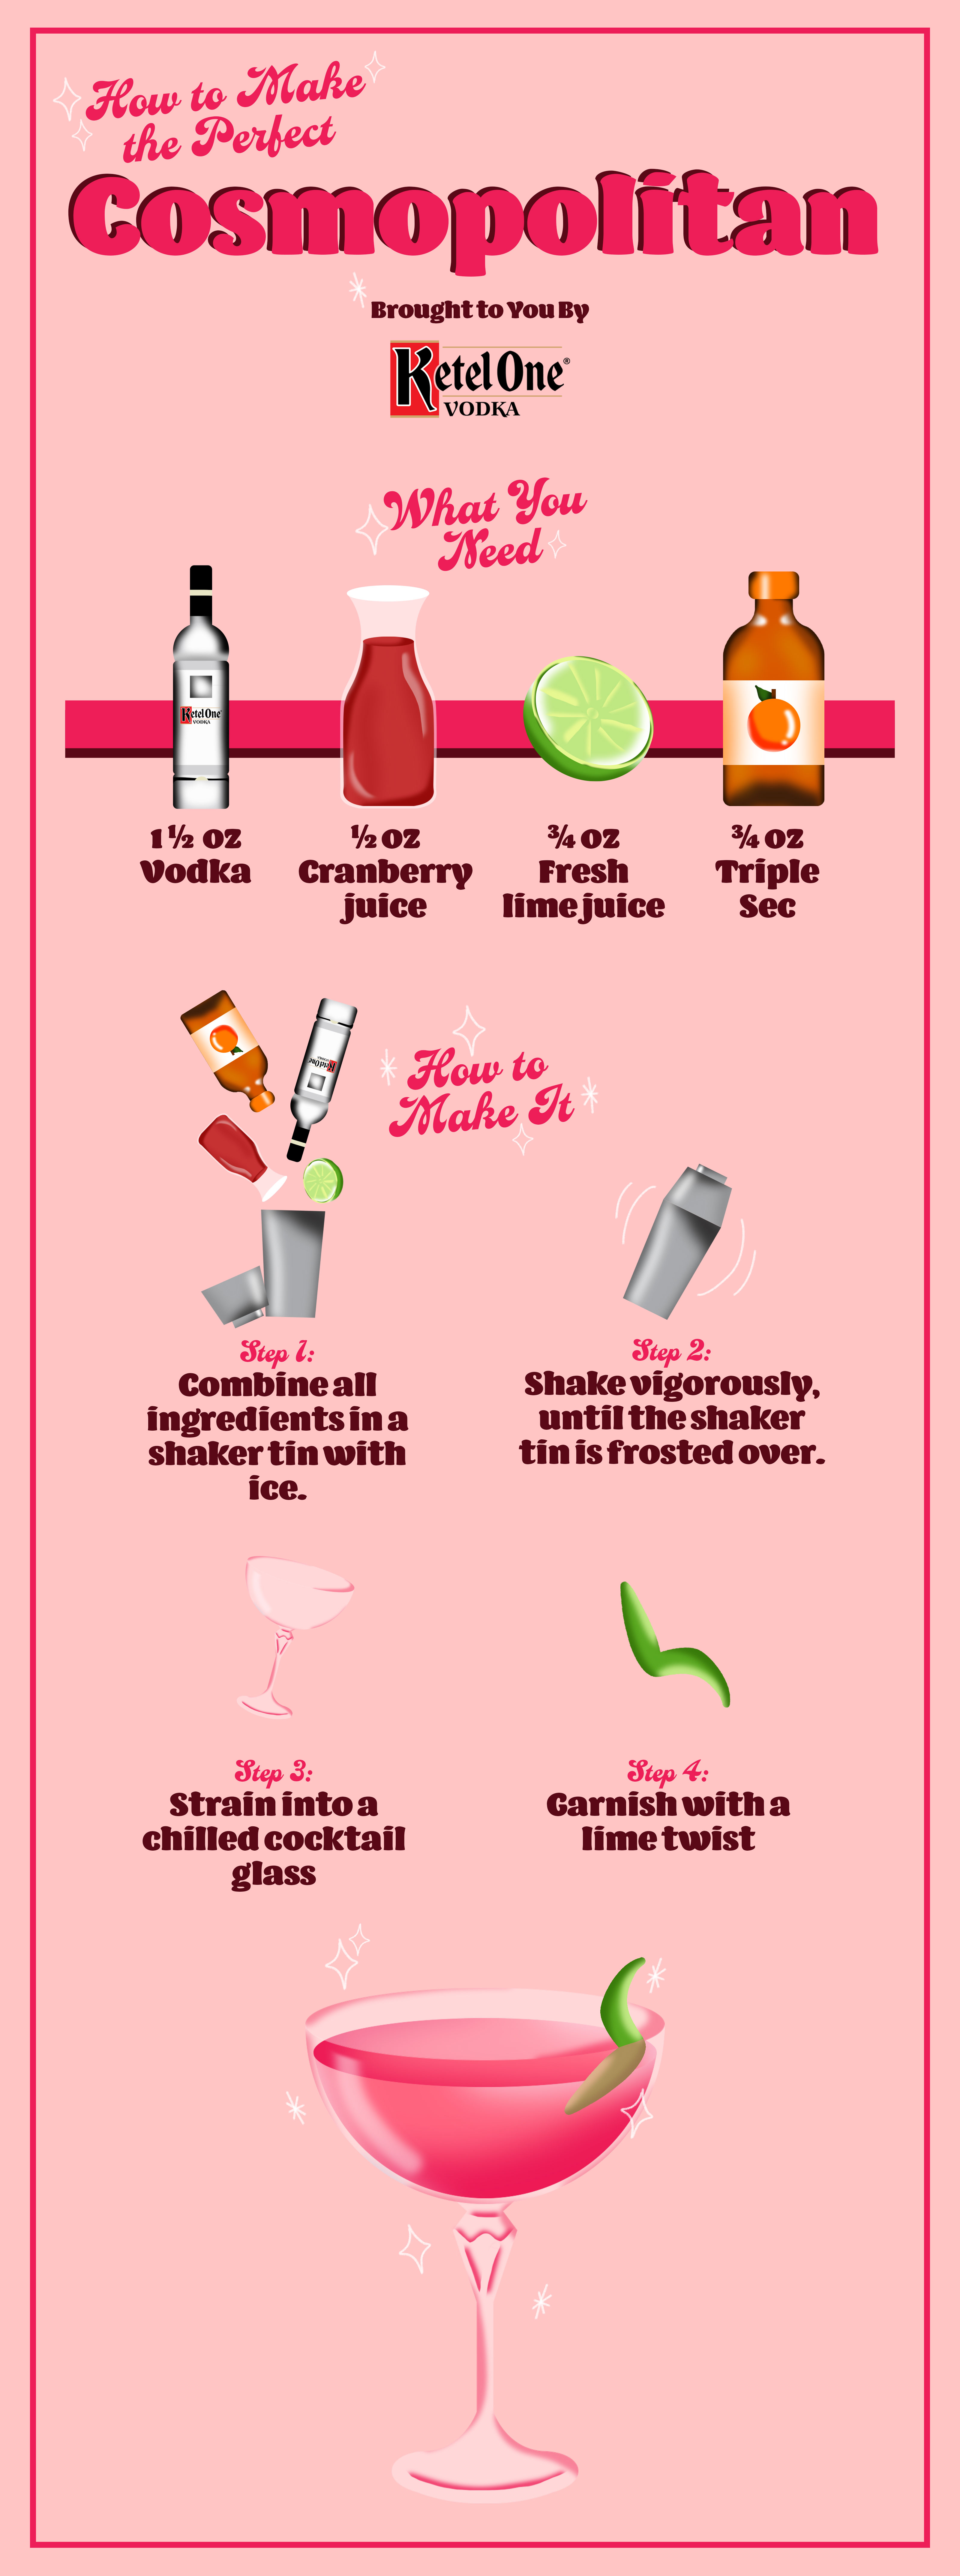 Here's how to craft the perfect Cosmopolitan, according to VinePair's guide